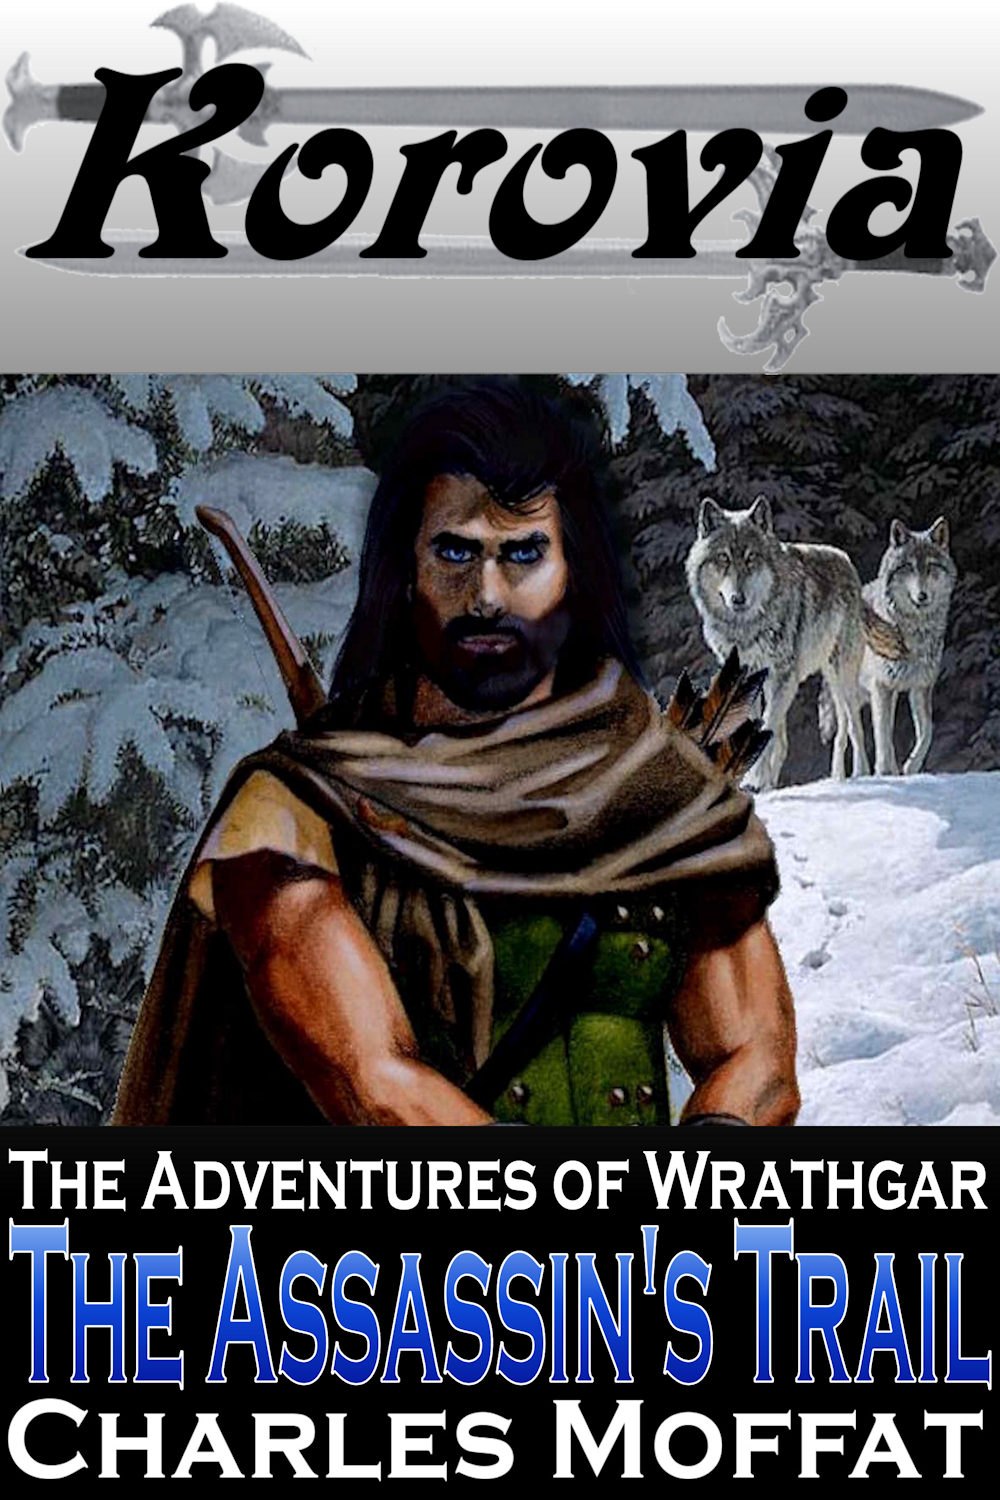 The Assassin's Trail - Book 1 of the Adventures of Wrathgar